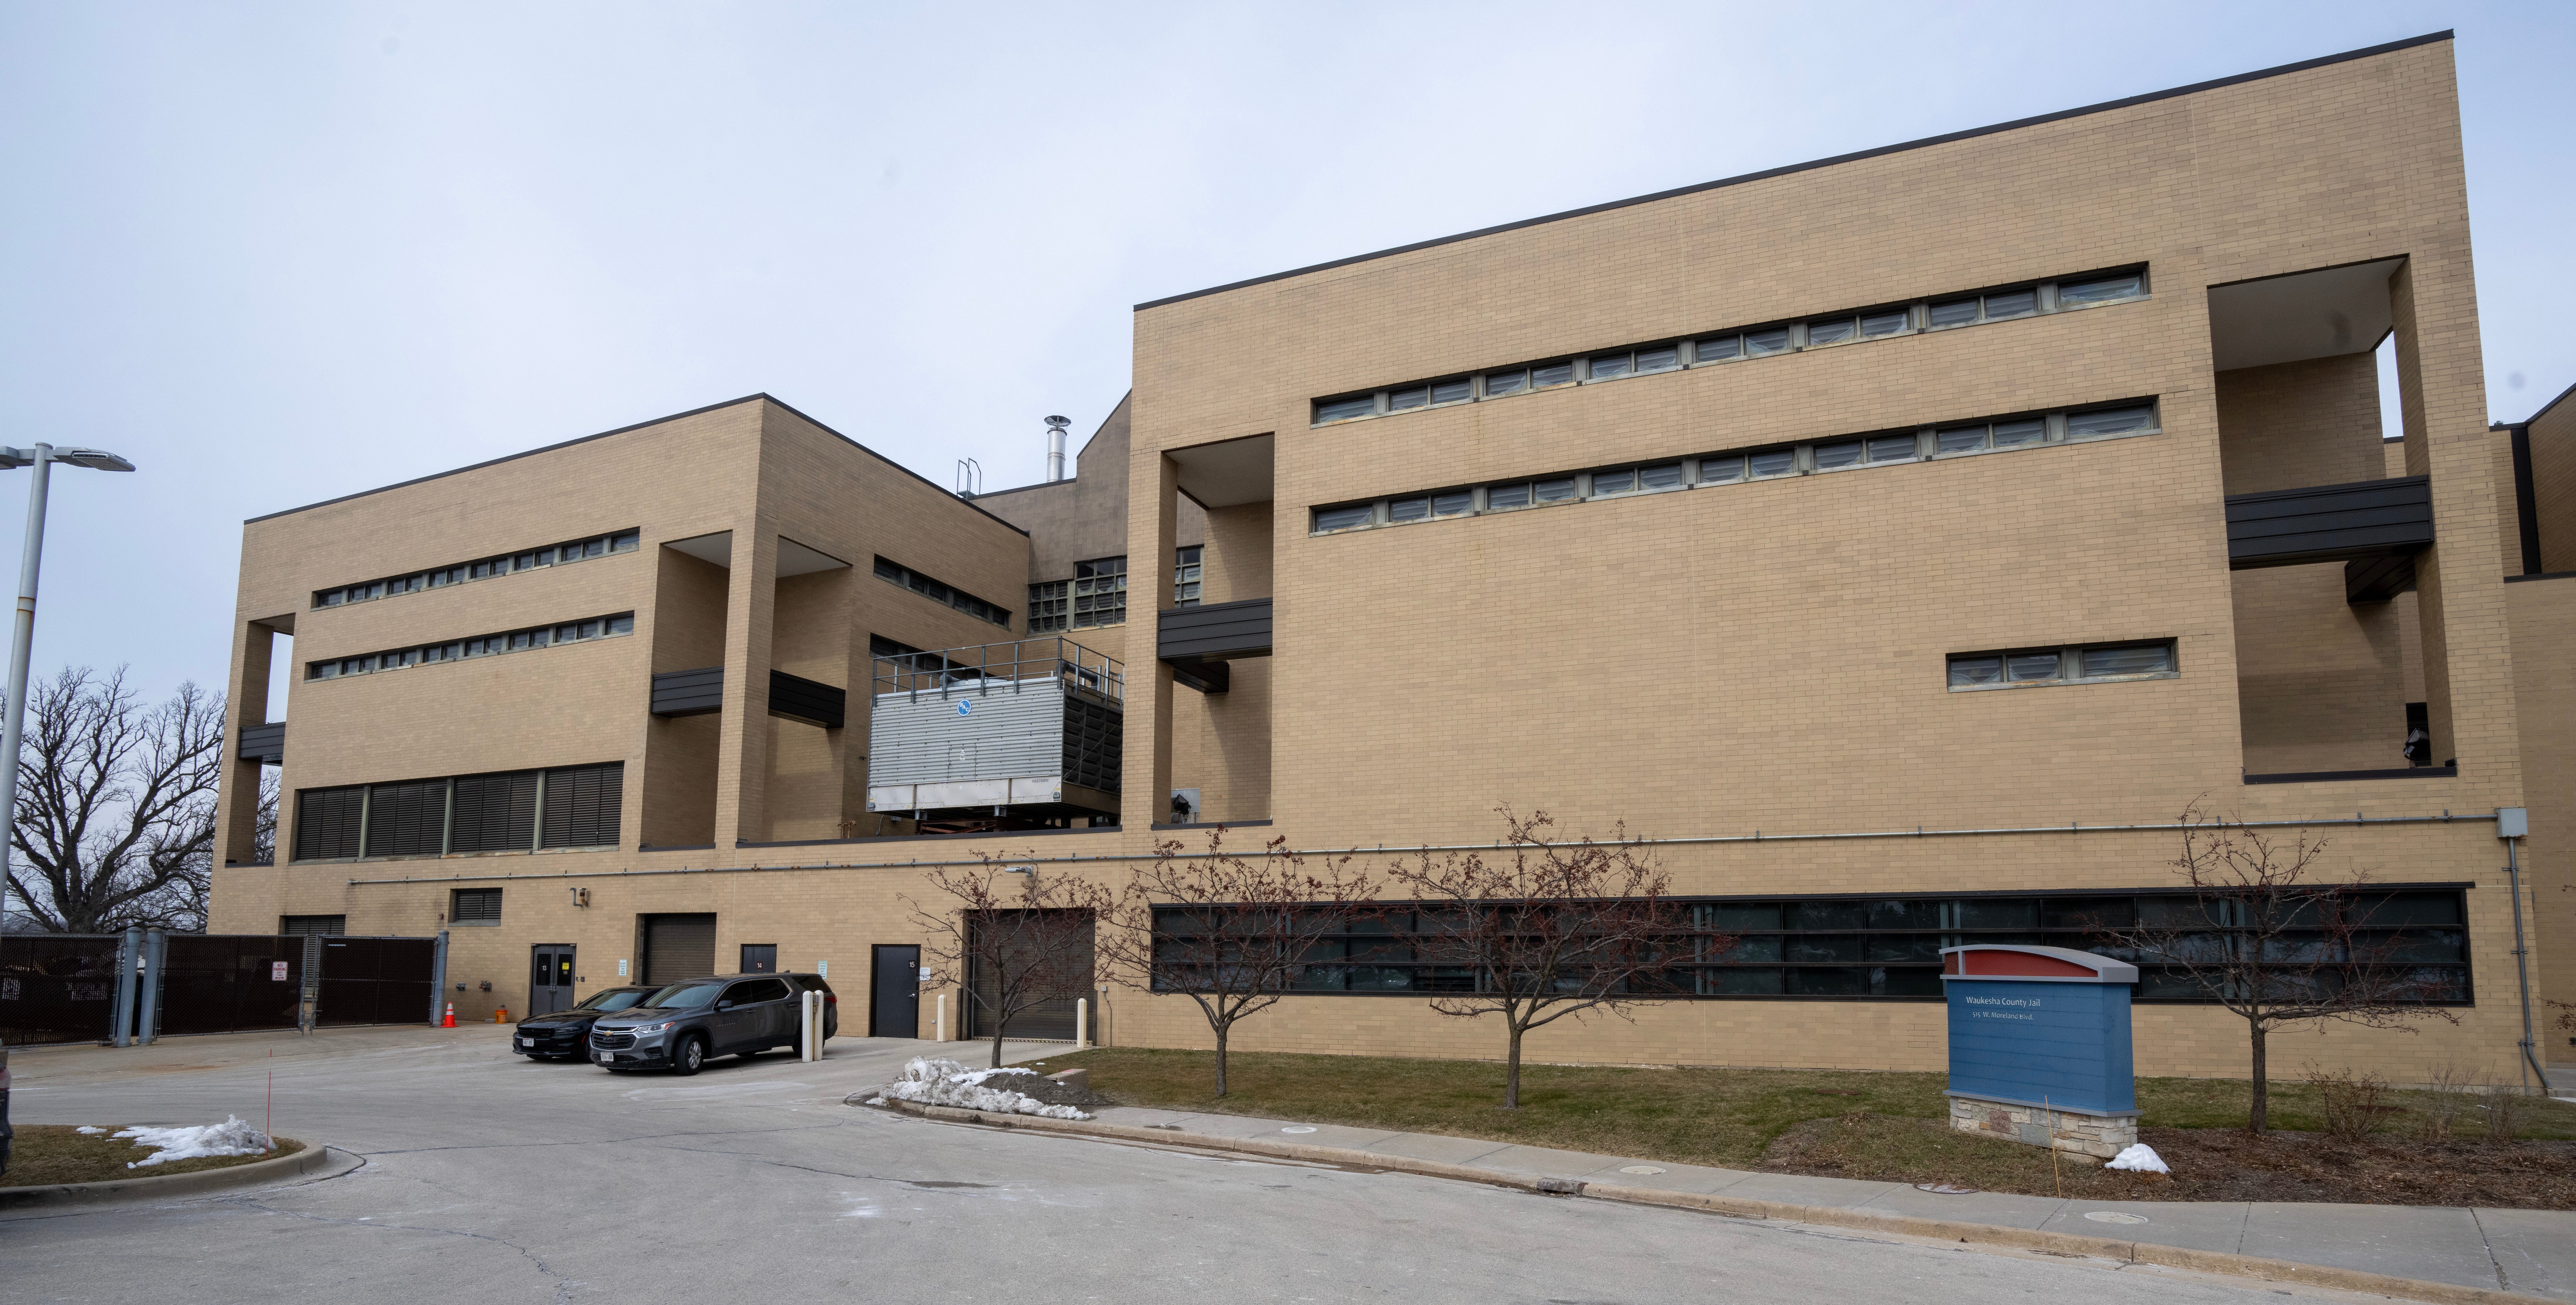 The Waukesha County Jail is shown in Wauskha, Wis. Bobbie Lou Schoeffling, 31, was found shot to death inside her home two weeks after telling a Milwaukee Police officer on July 15 that her ex-boyfriend beat her in a car in front of her children about 30 minutes earlier.